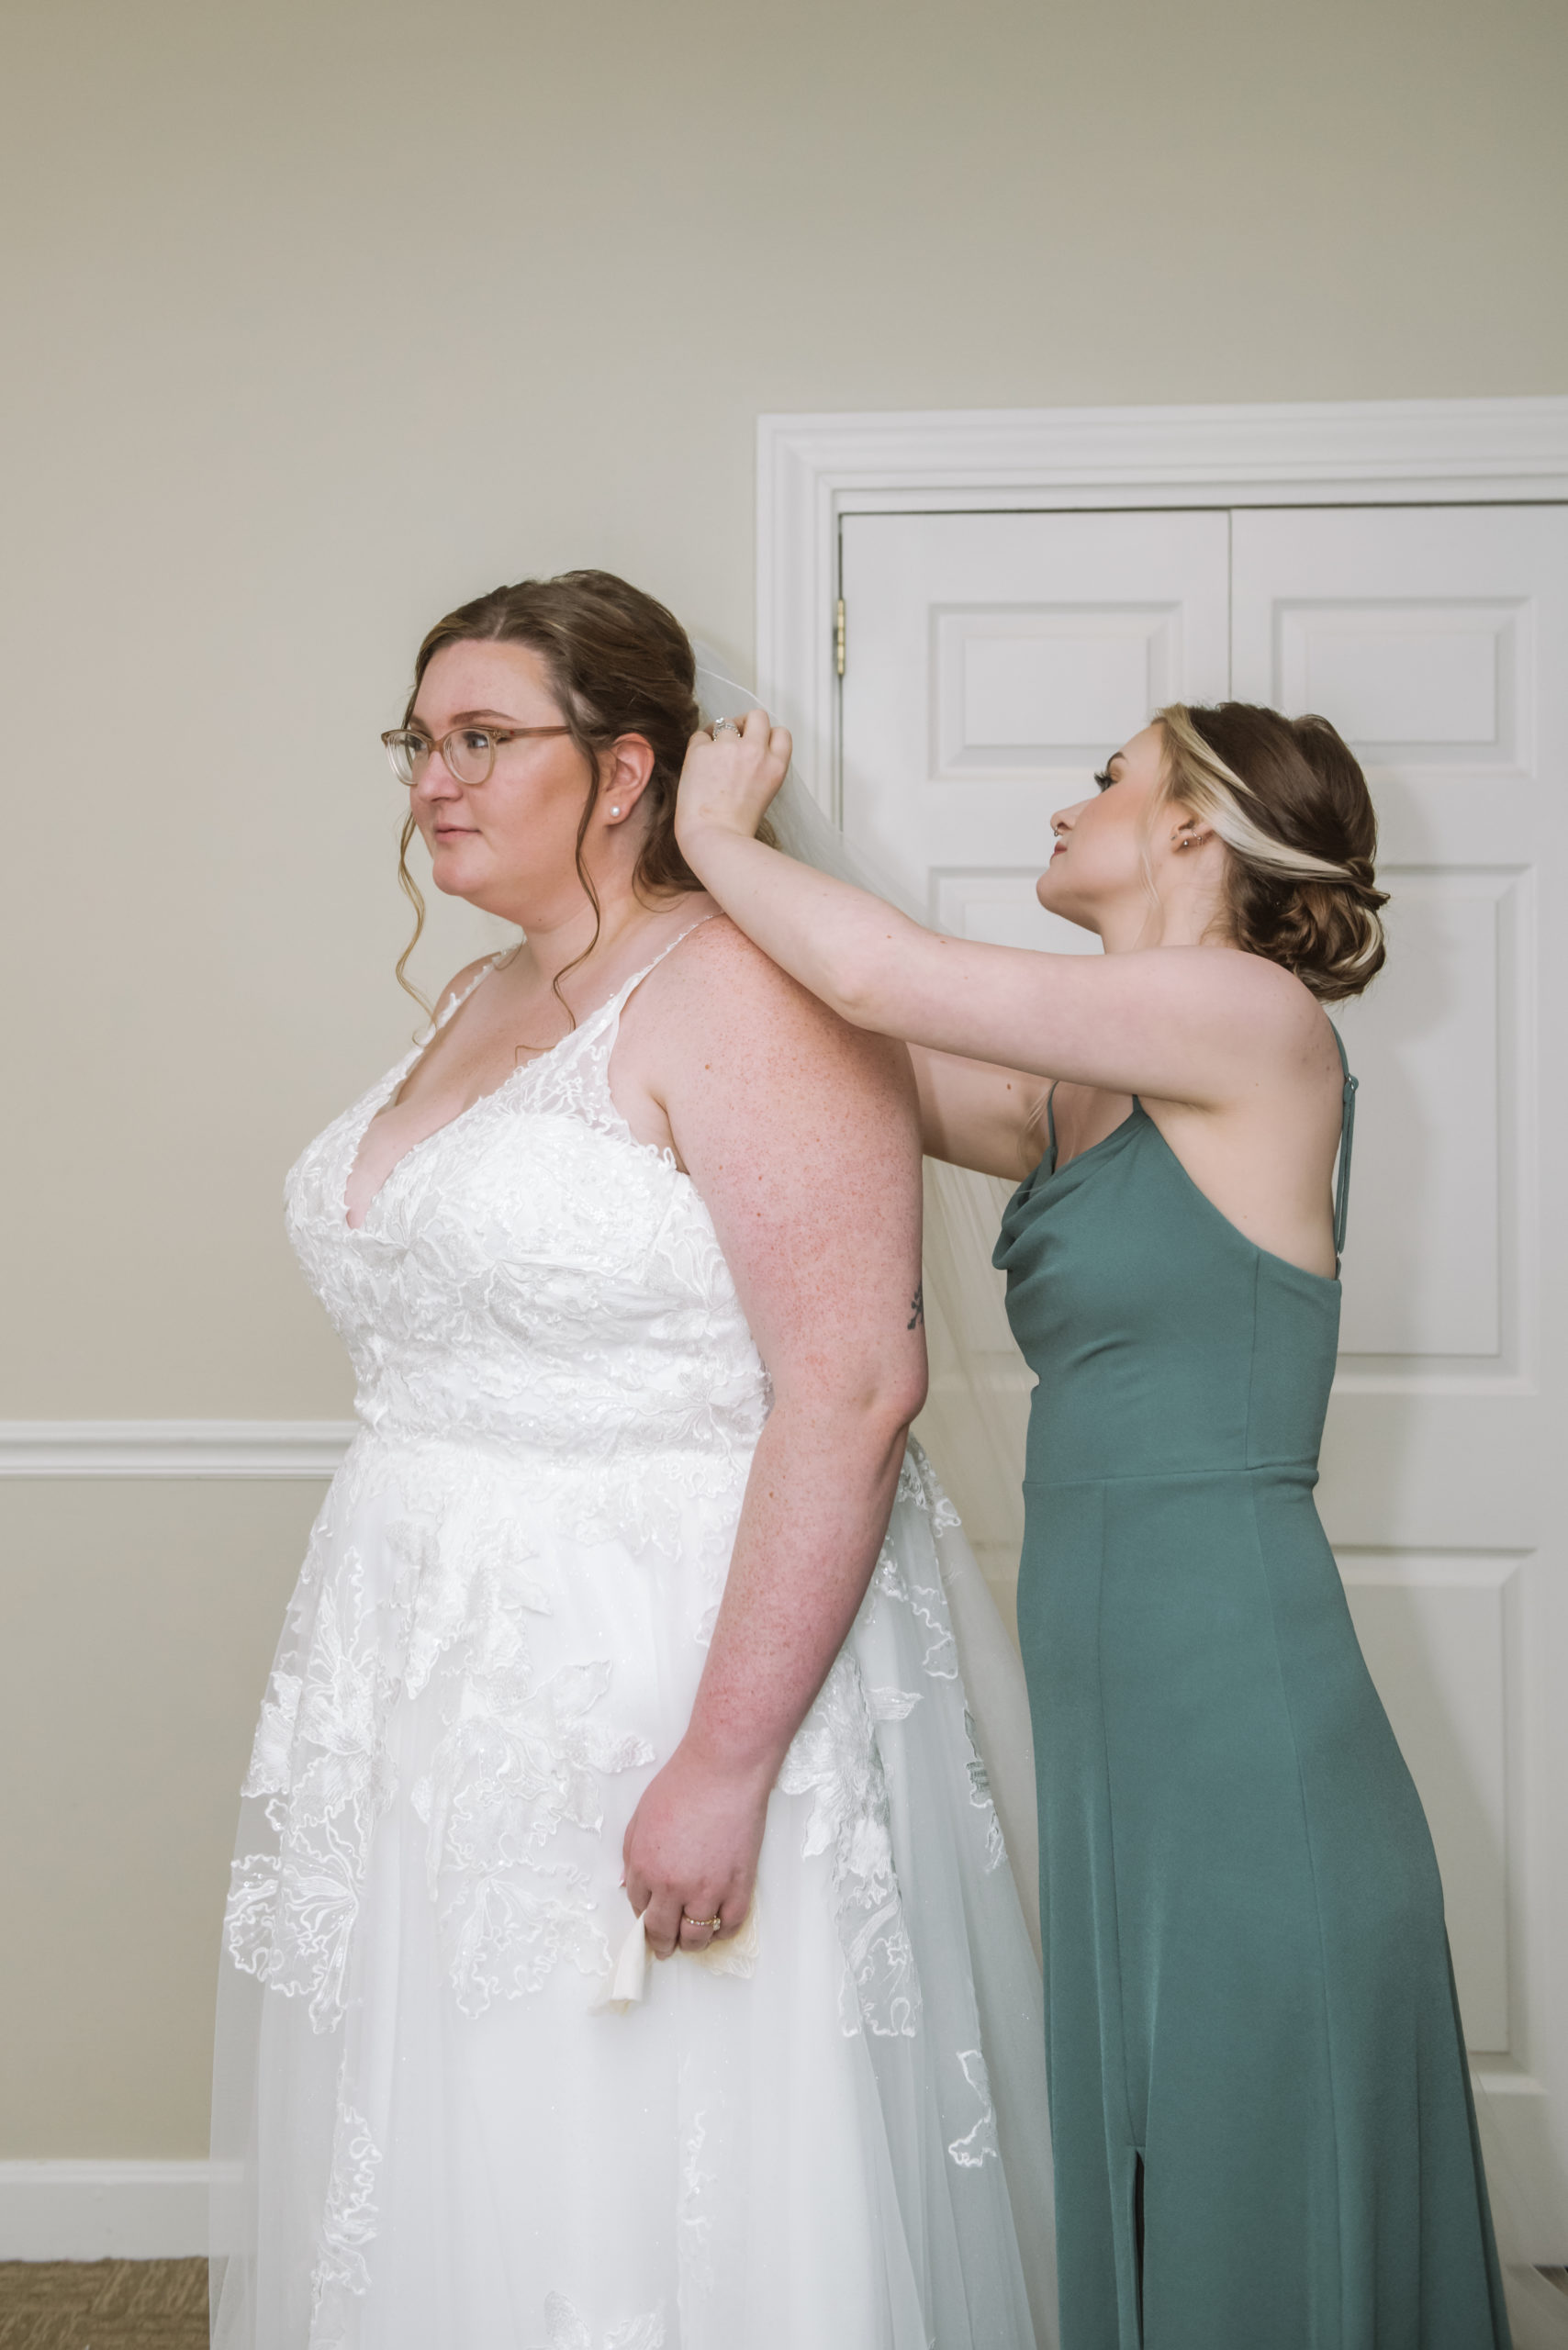 Maid of honor adjusting the bride's veil in a hotel room. The bride is dressed in her white lace long gown and the maid of honor is in her sage gown.